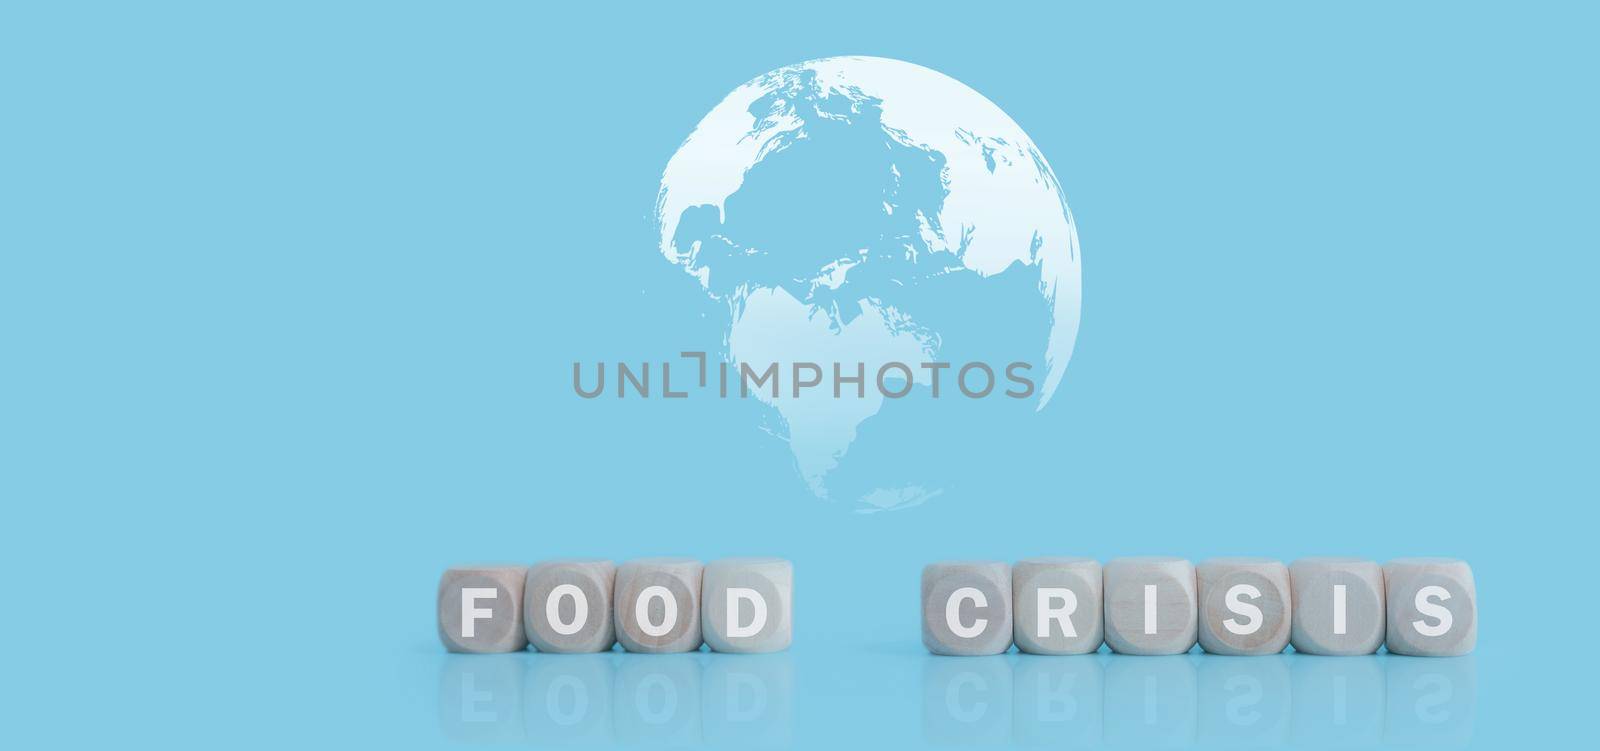 Global food crisis concept. Food crisis words on wooden cubes with earth map on blue background. Background for food crisis issue. Human catastrophe in global food crisis. Earth image provided by Nasa